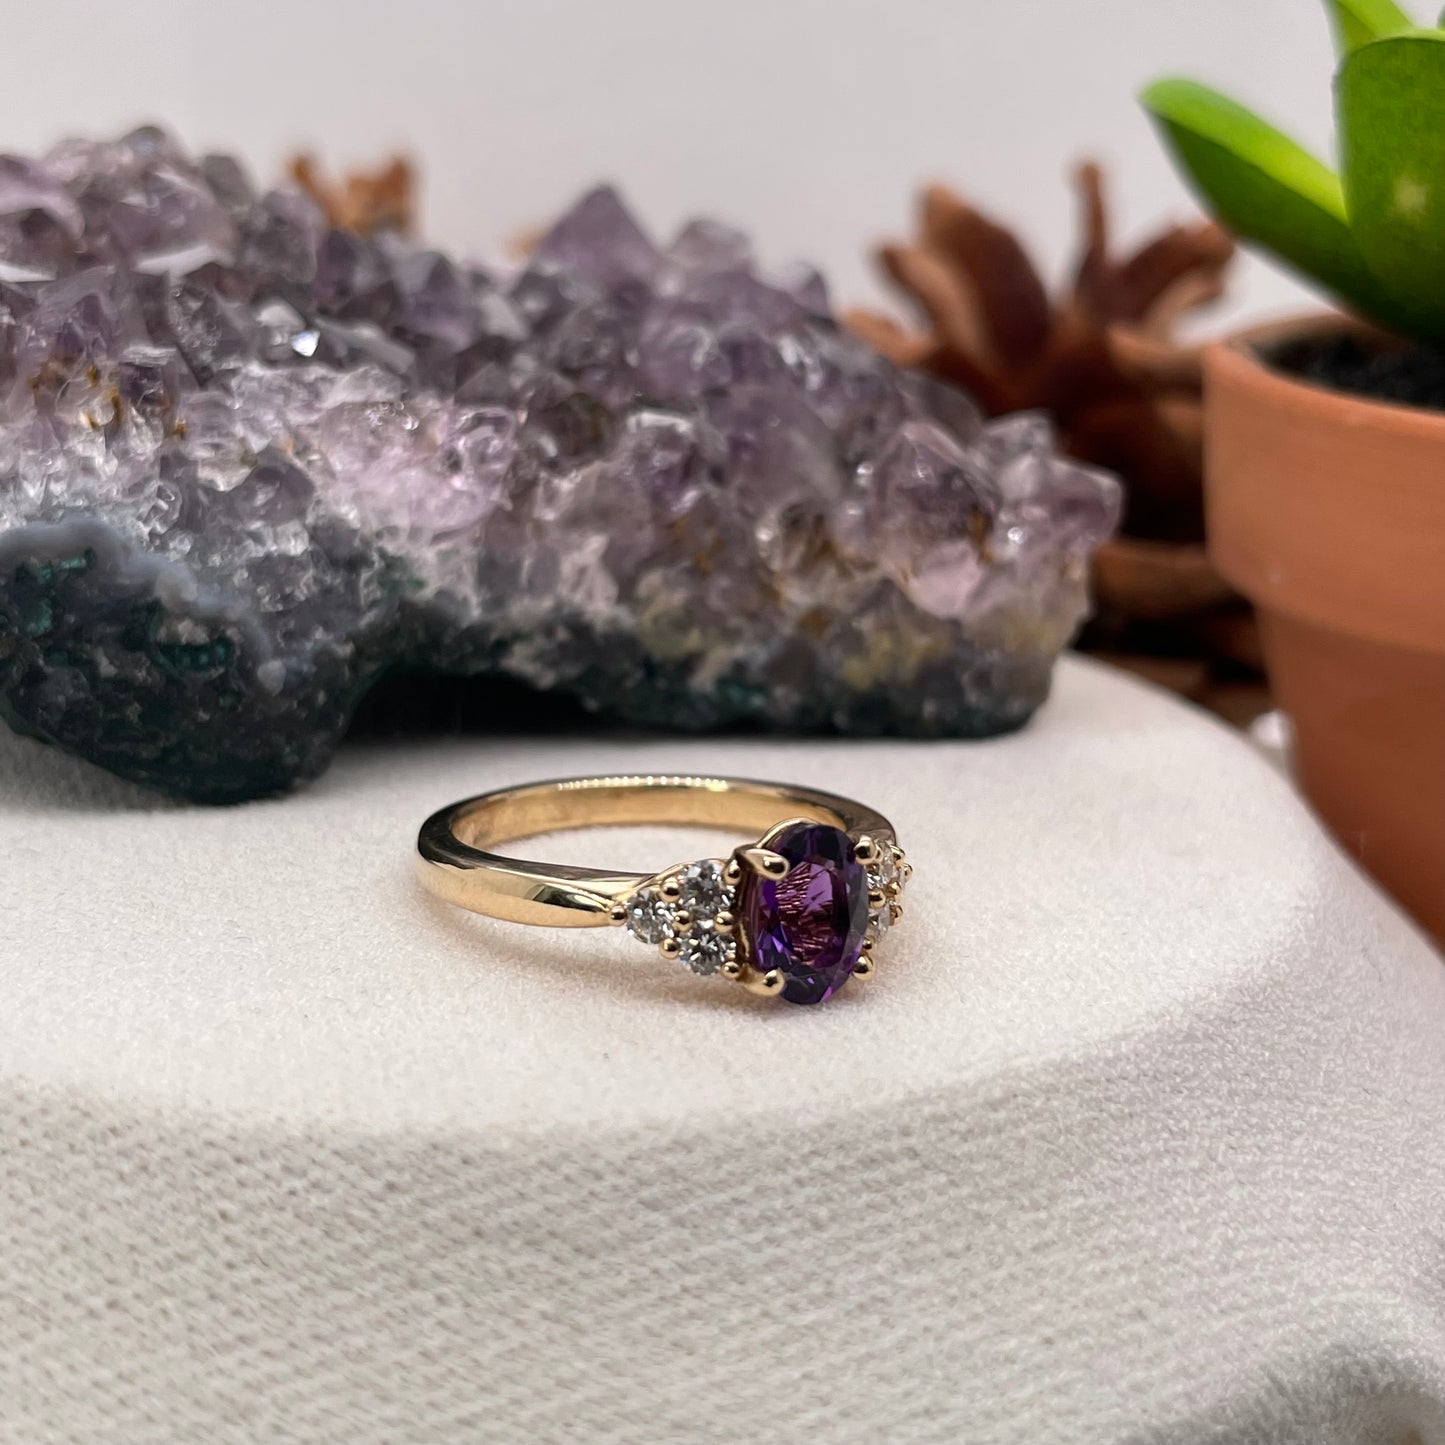 14K Yellow Gold Amethyst Ring with Diamond